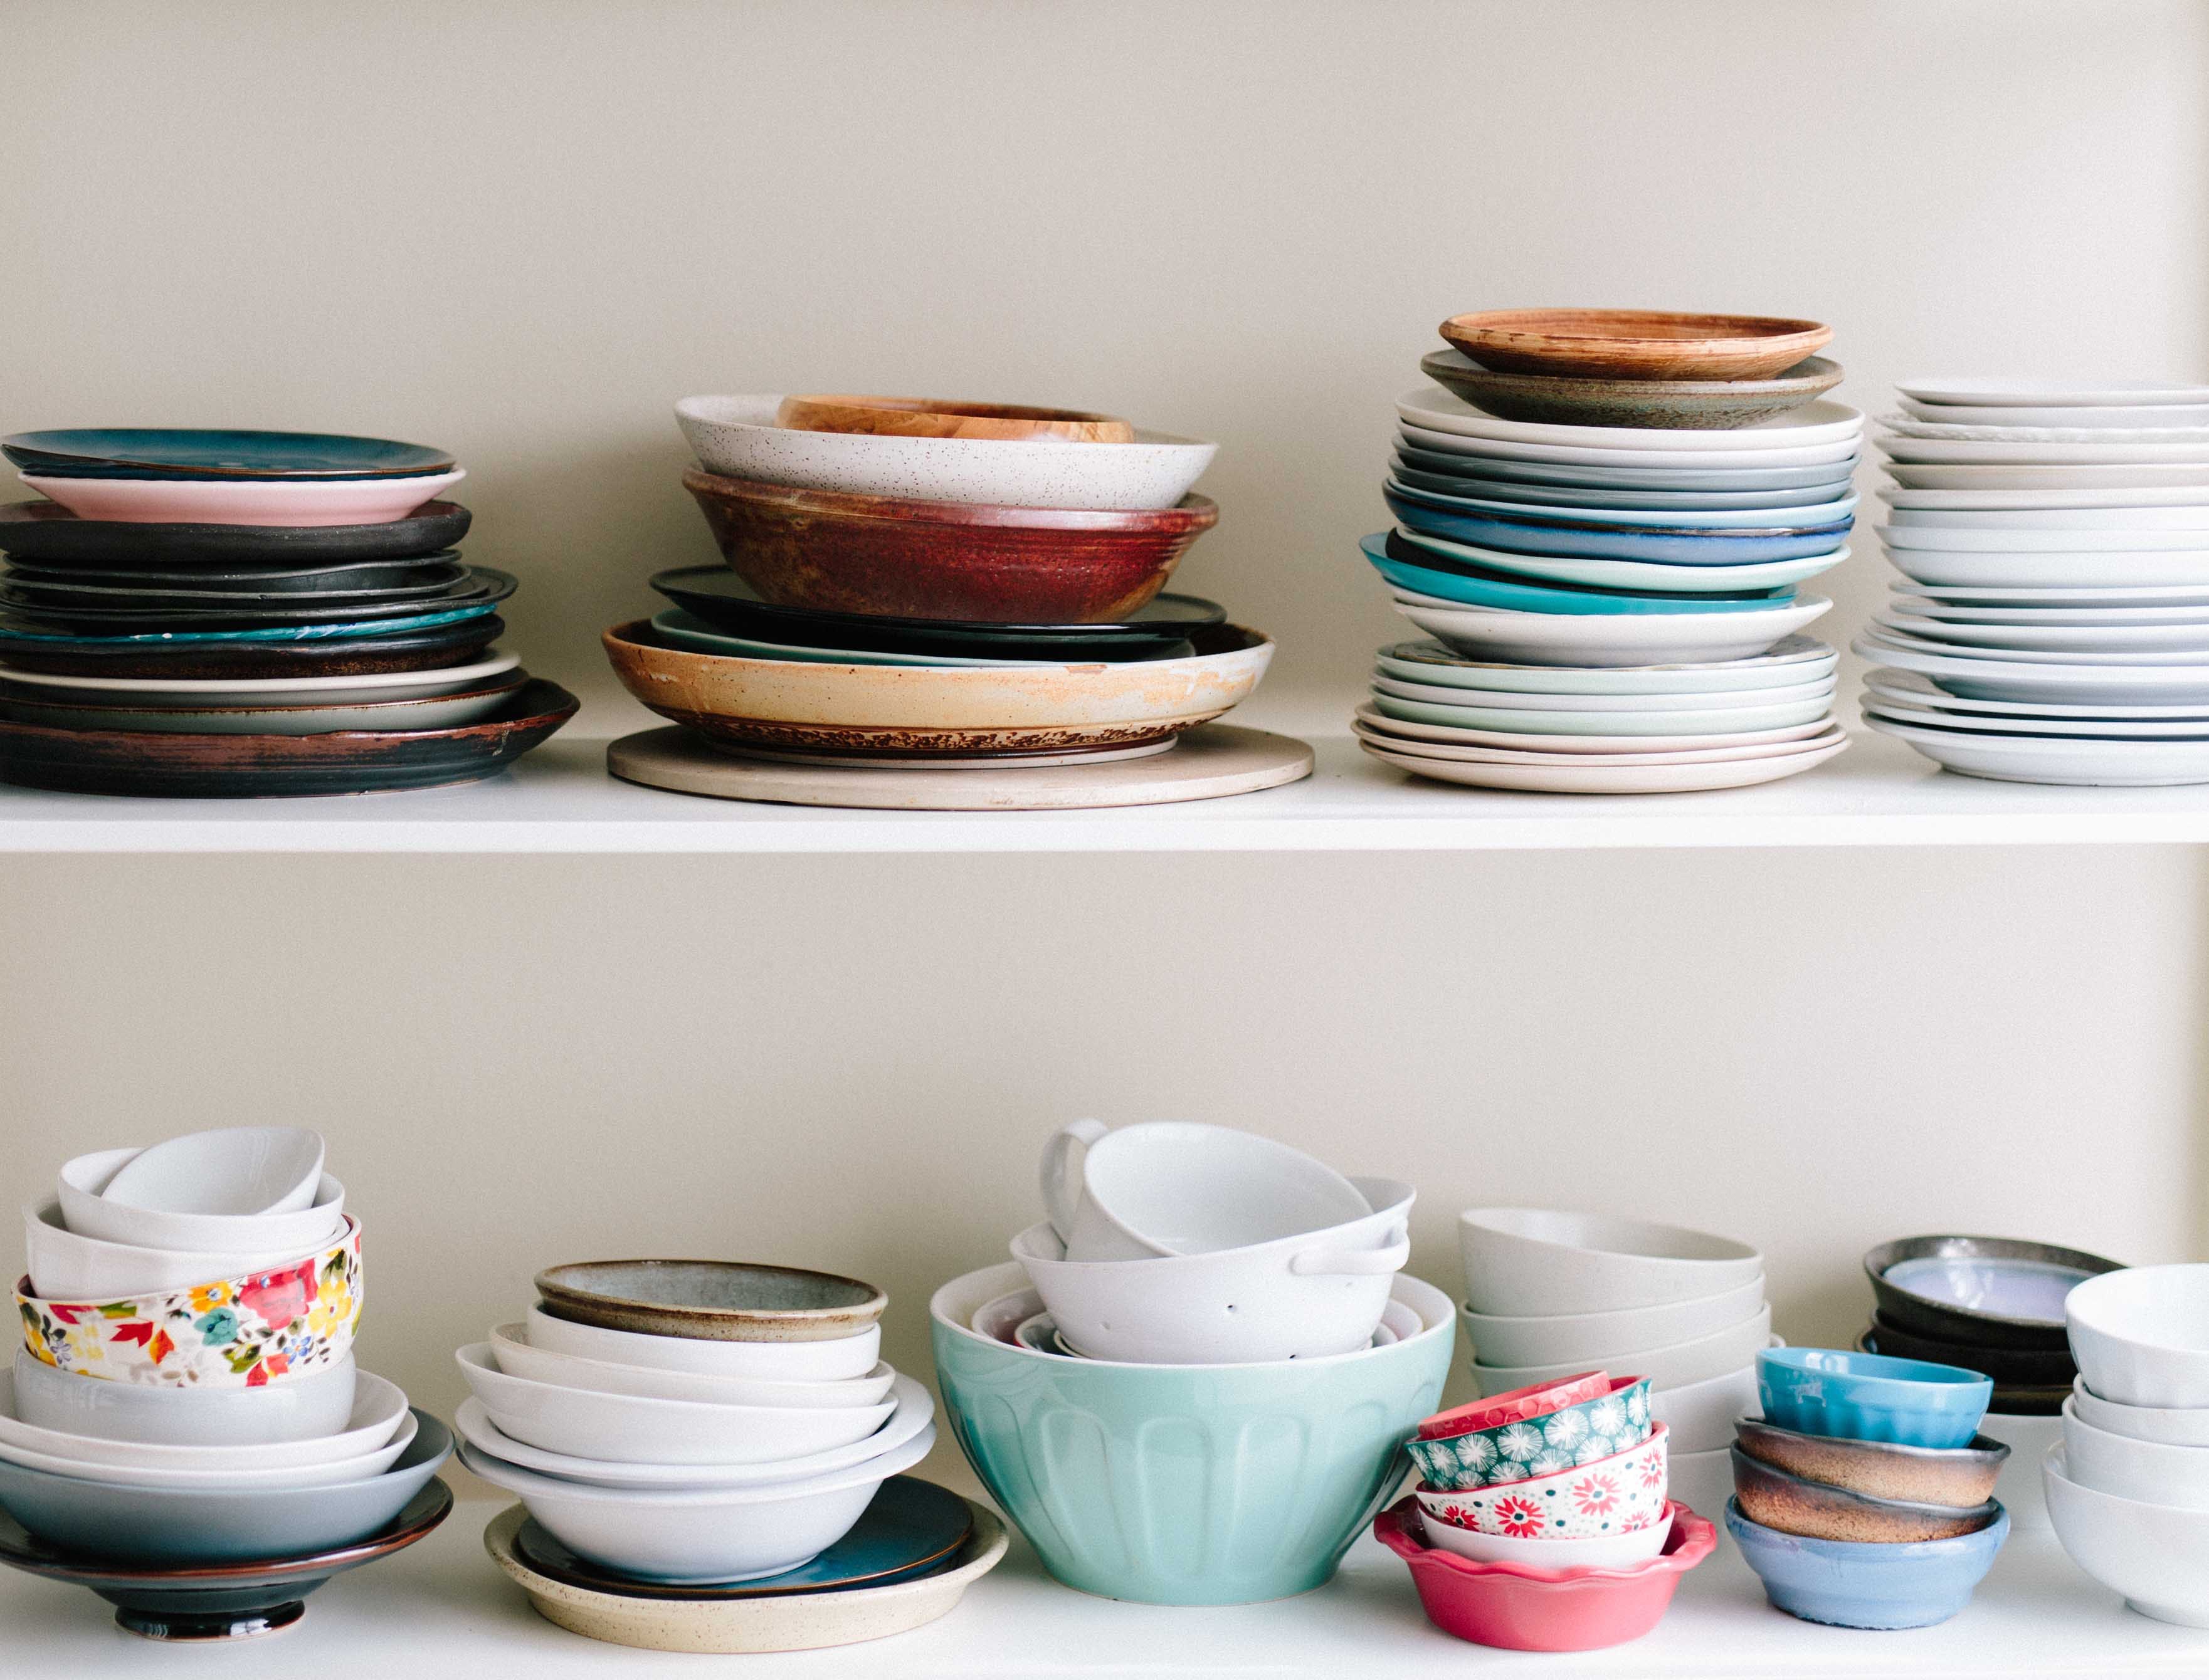 bowls and plates stacked on top of each other on 2 white shelves